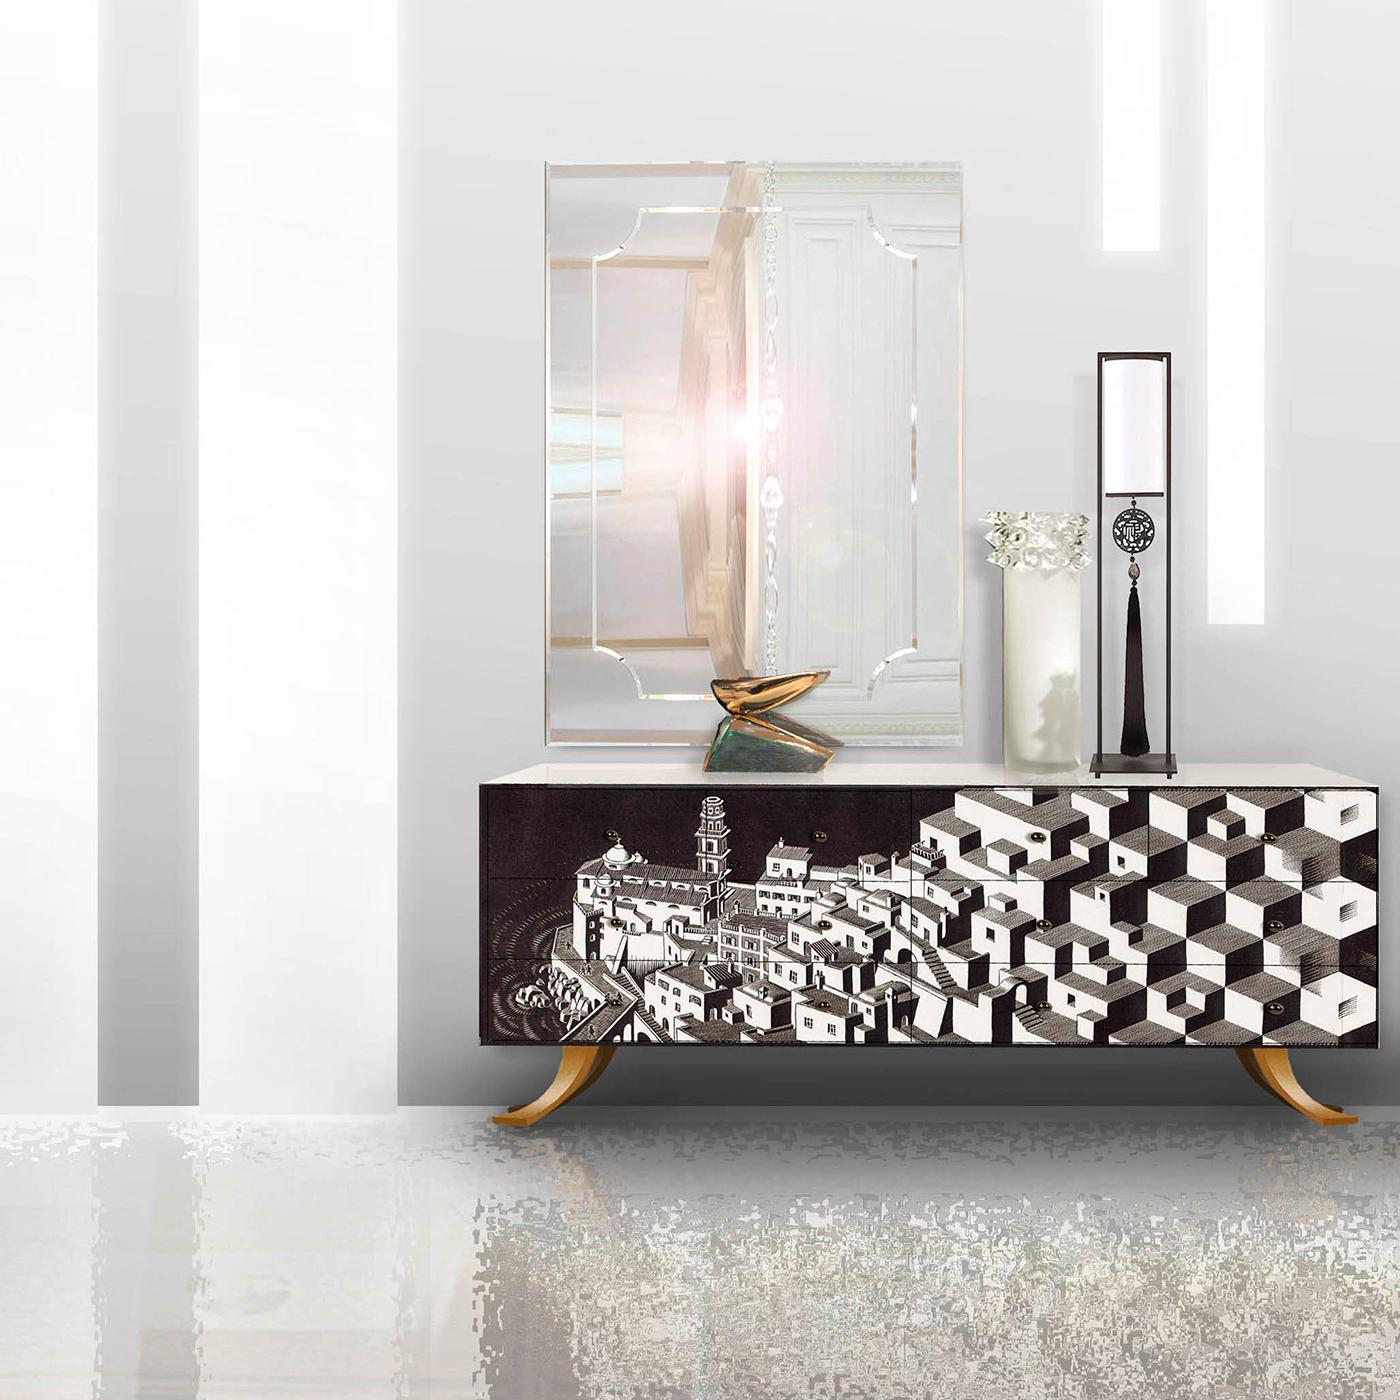 This stunning object of functional decor is a work of art that will enrich a modern or eclectic interior, while also providing precious storage space in the four large bottom drawers and the four top drawers. Entirely crafted of wood with a unique